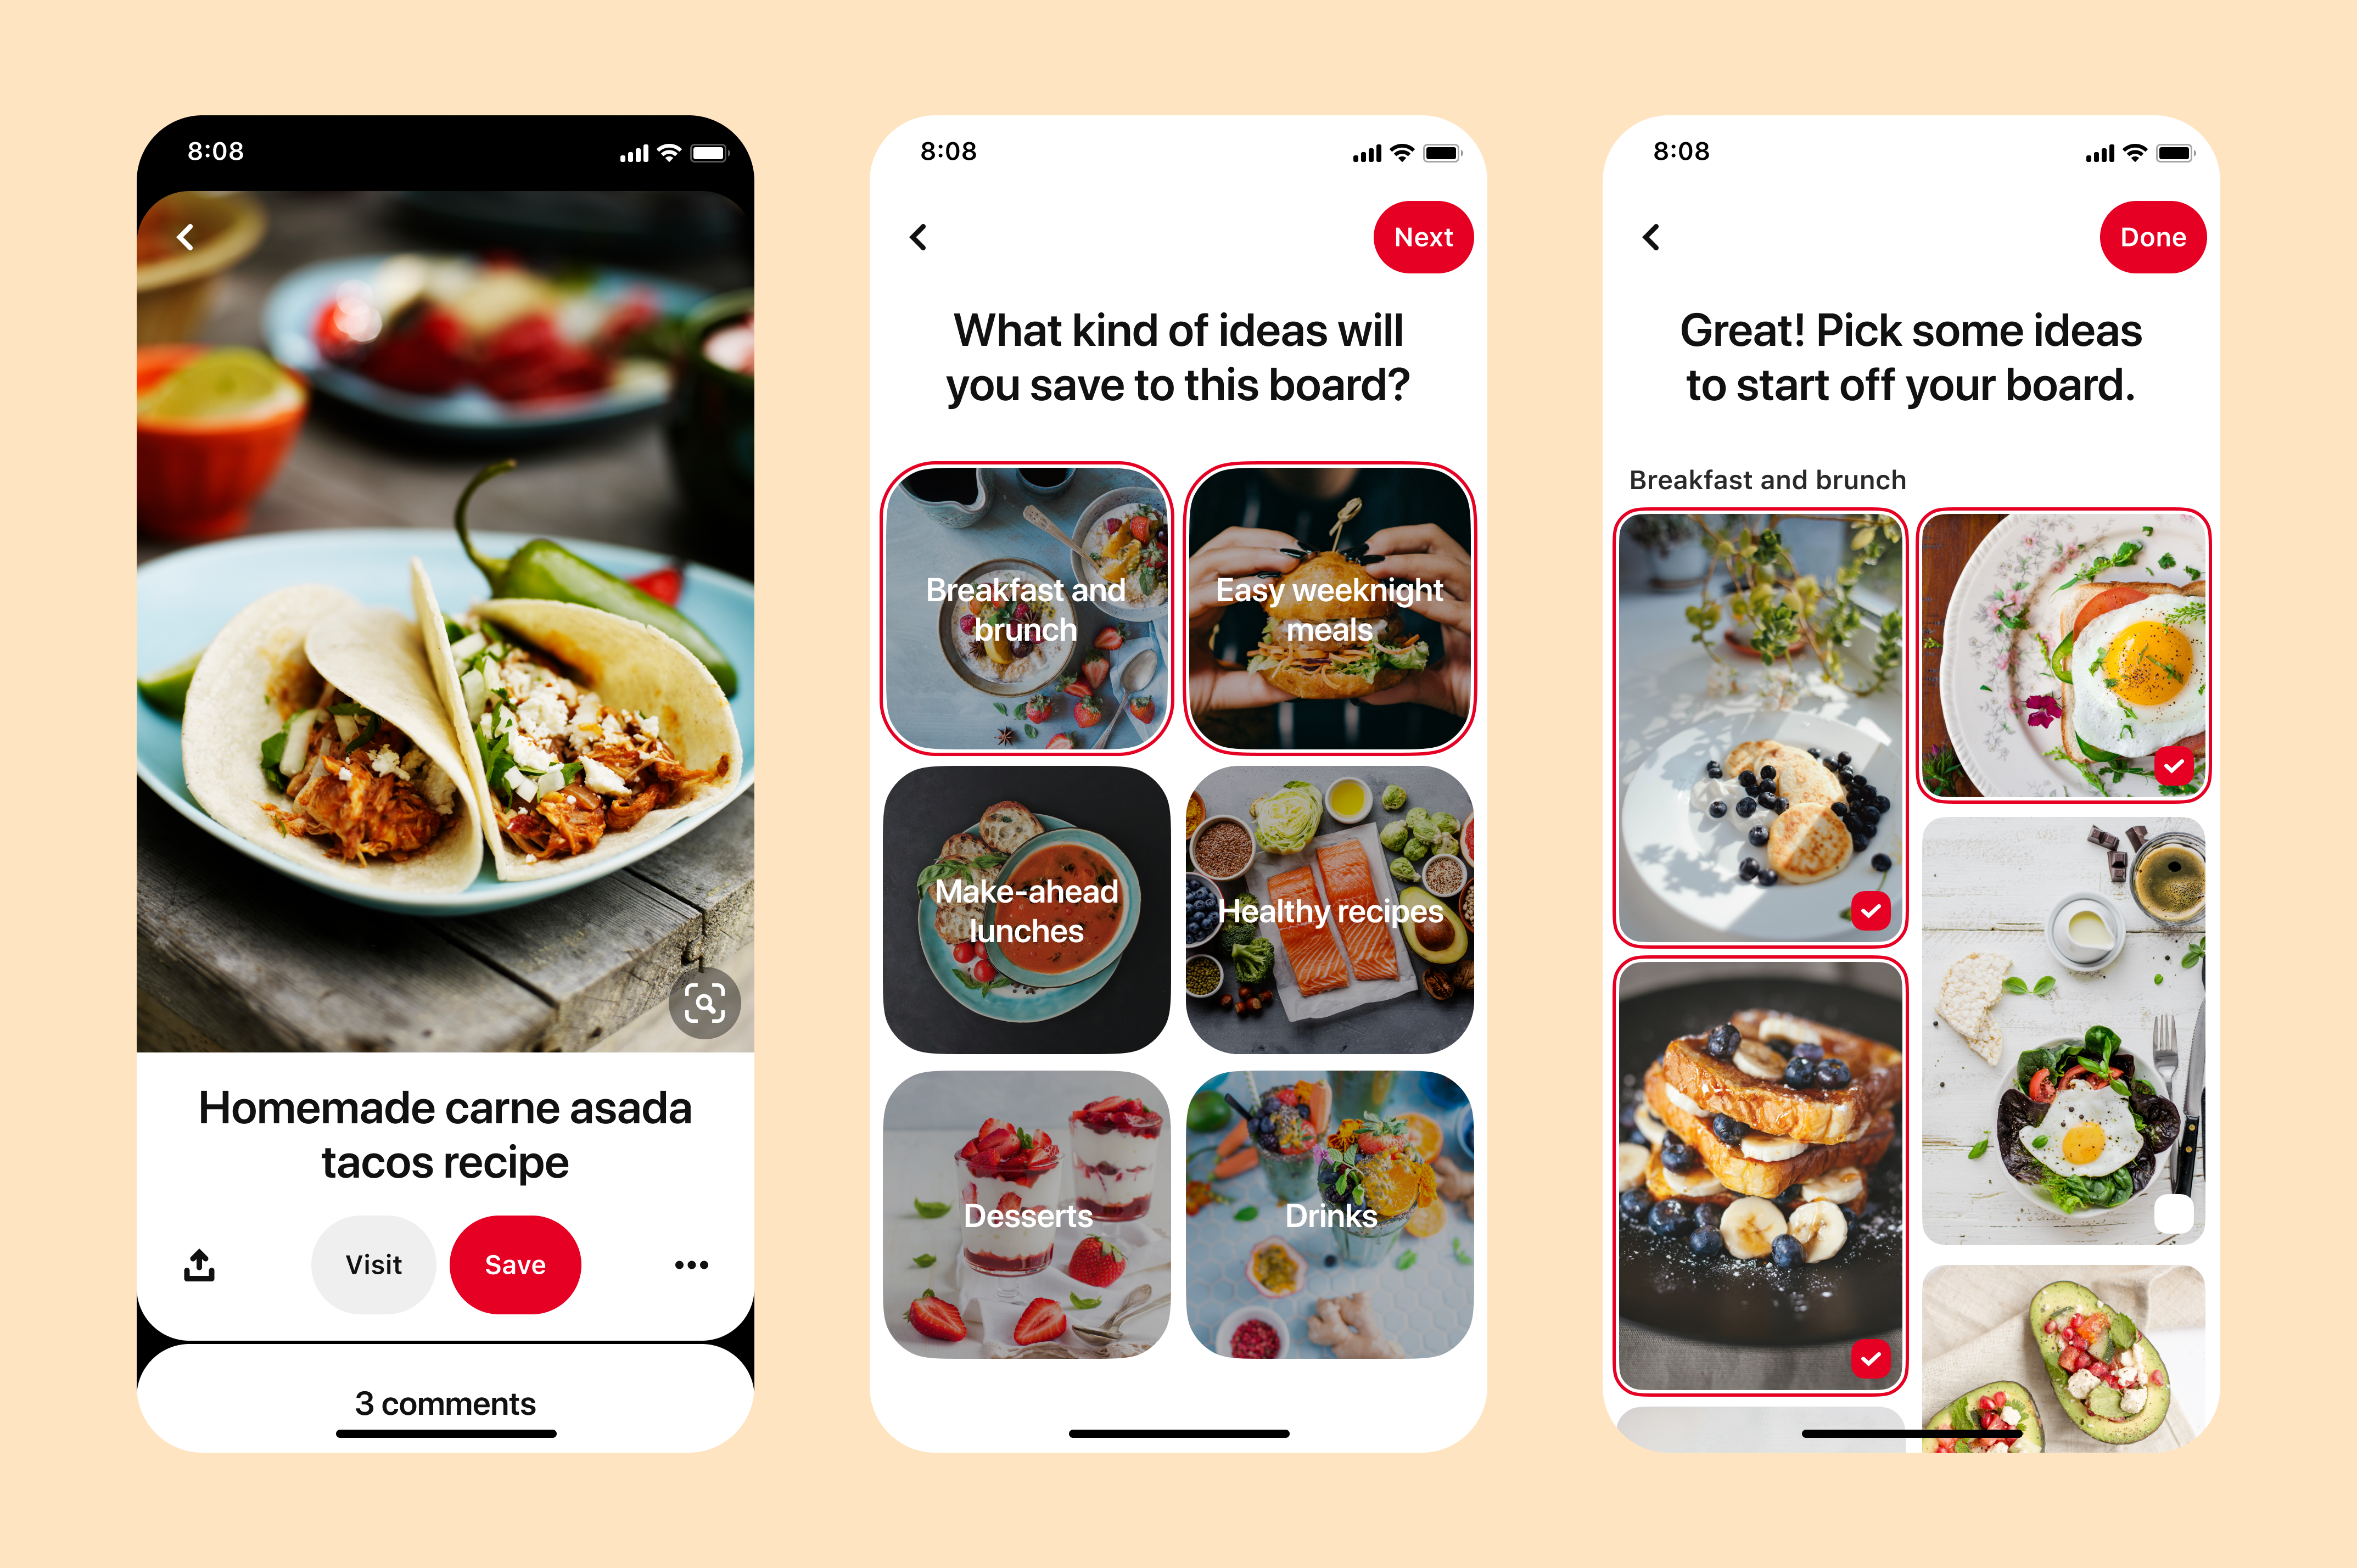 pinterest rolls out new board features including notes, dates and section suggestions | techcrunch